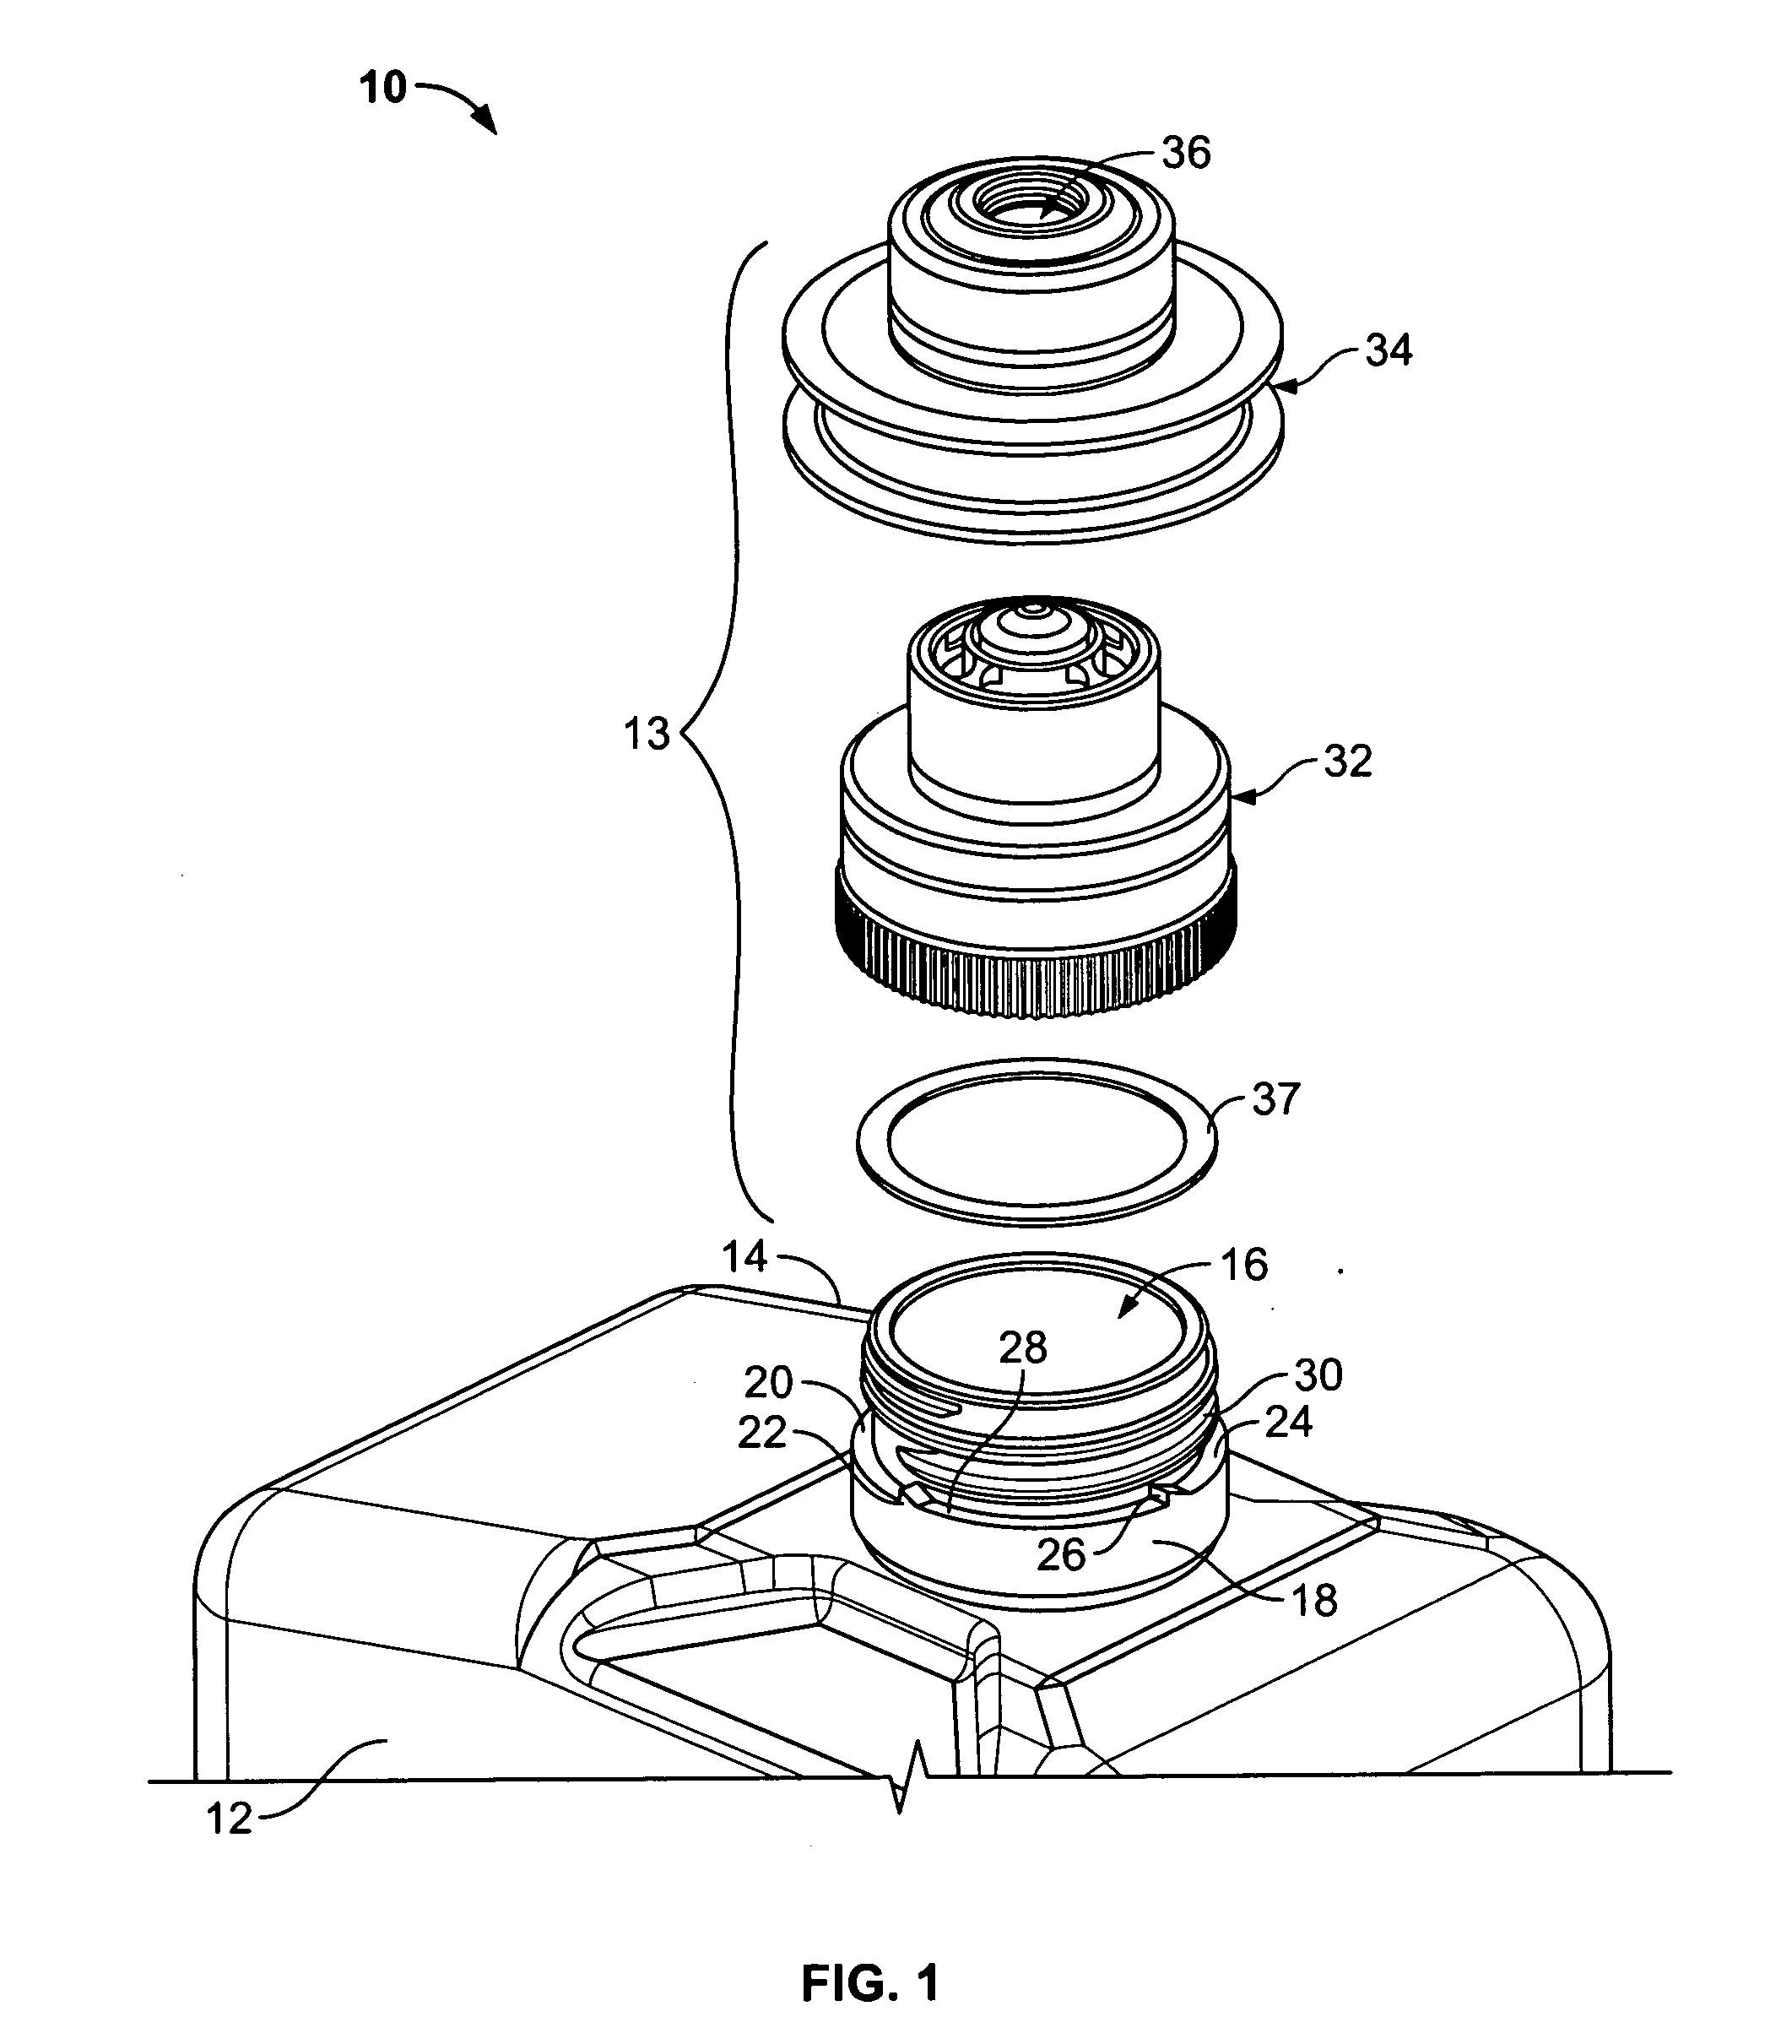 Cap assembly for an ink bottle